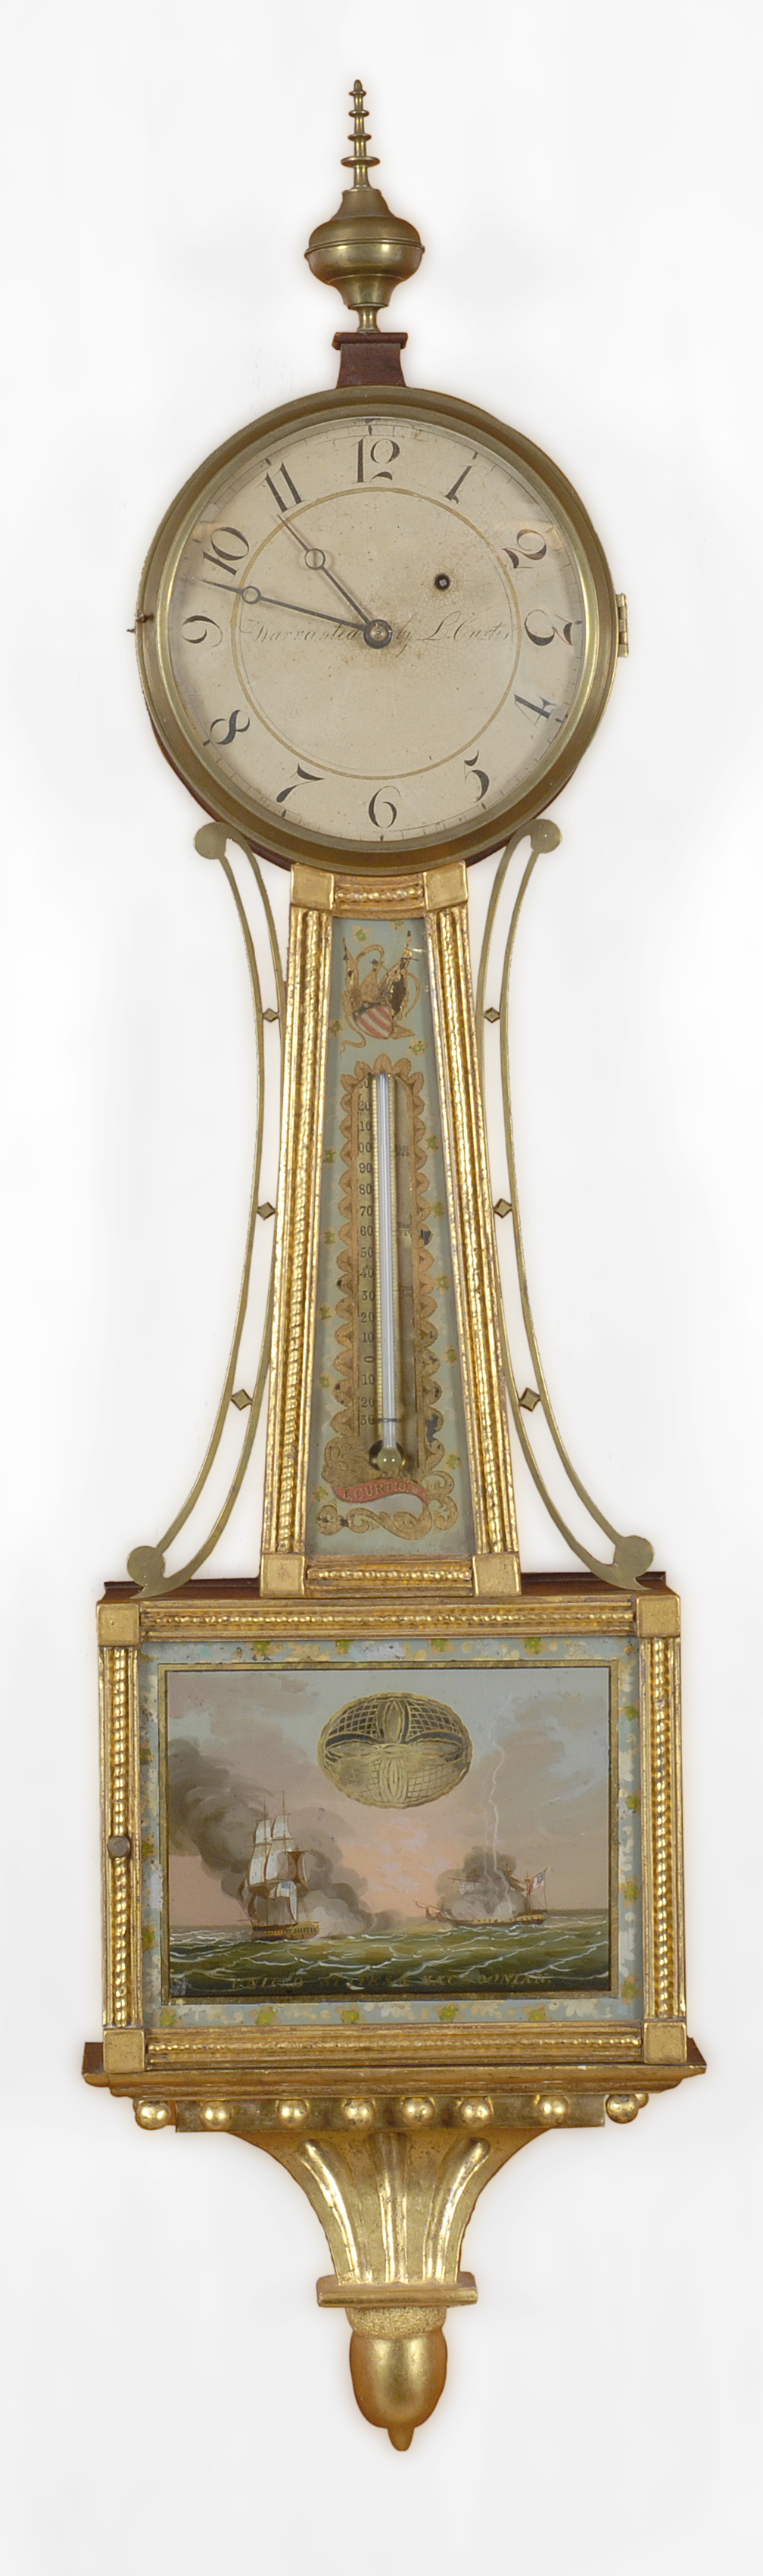 An Important Federal eglomisé presentation patent timepiece with rare thermometer,  Lemuel Curtis, Concord, Massachusetts, circa 1815.